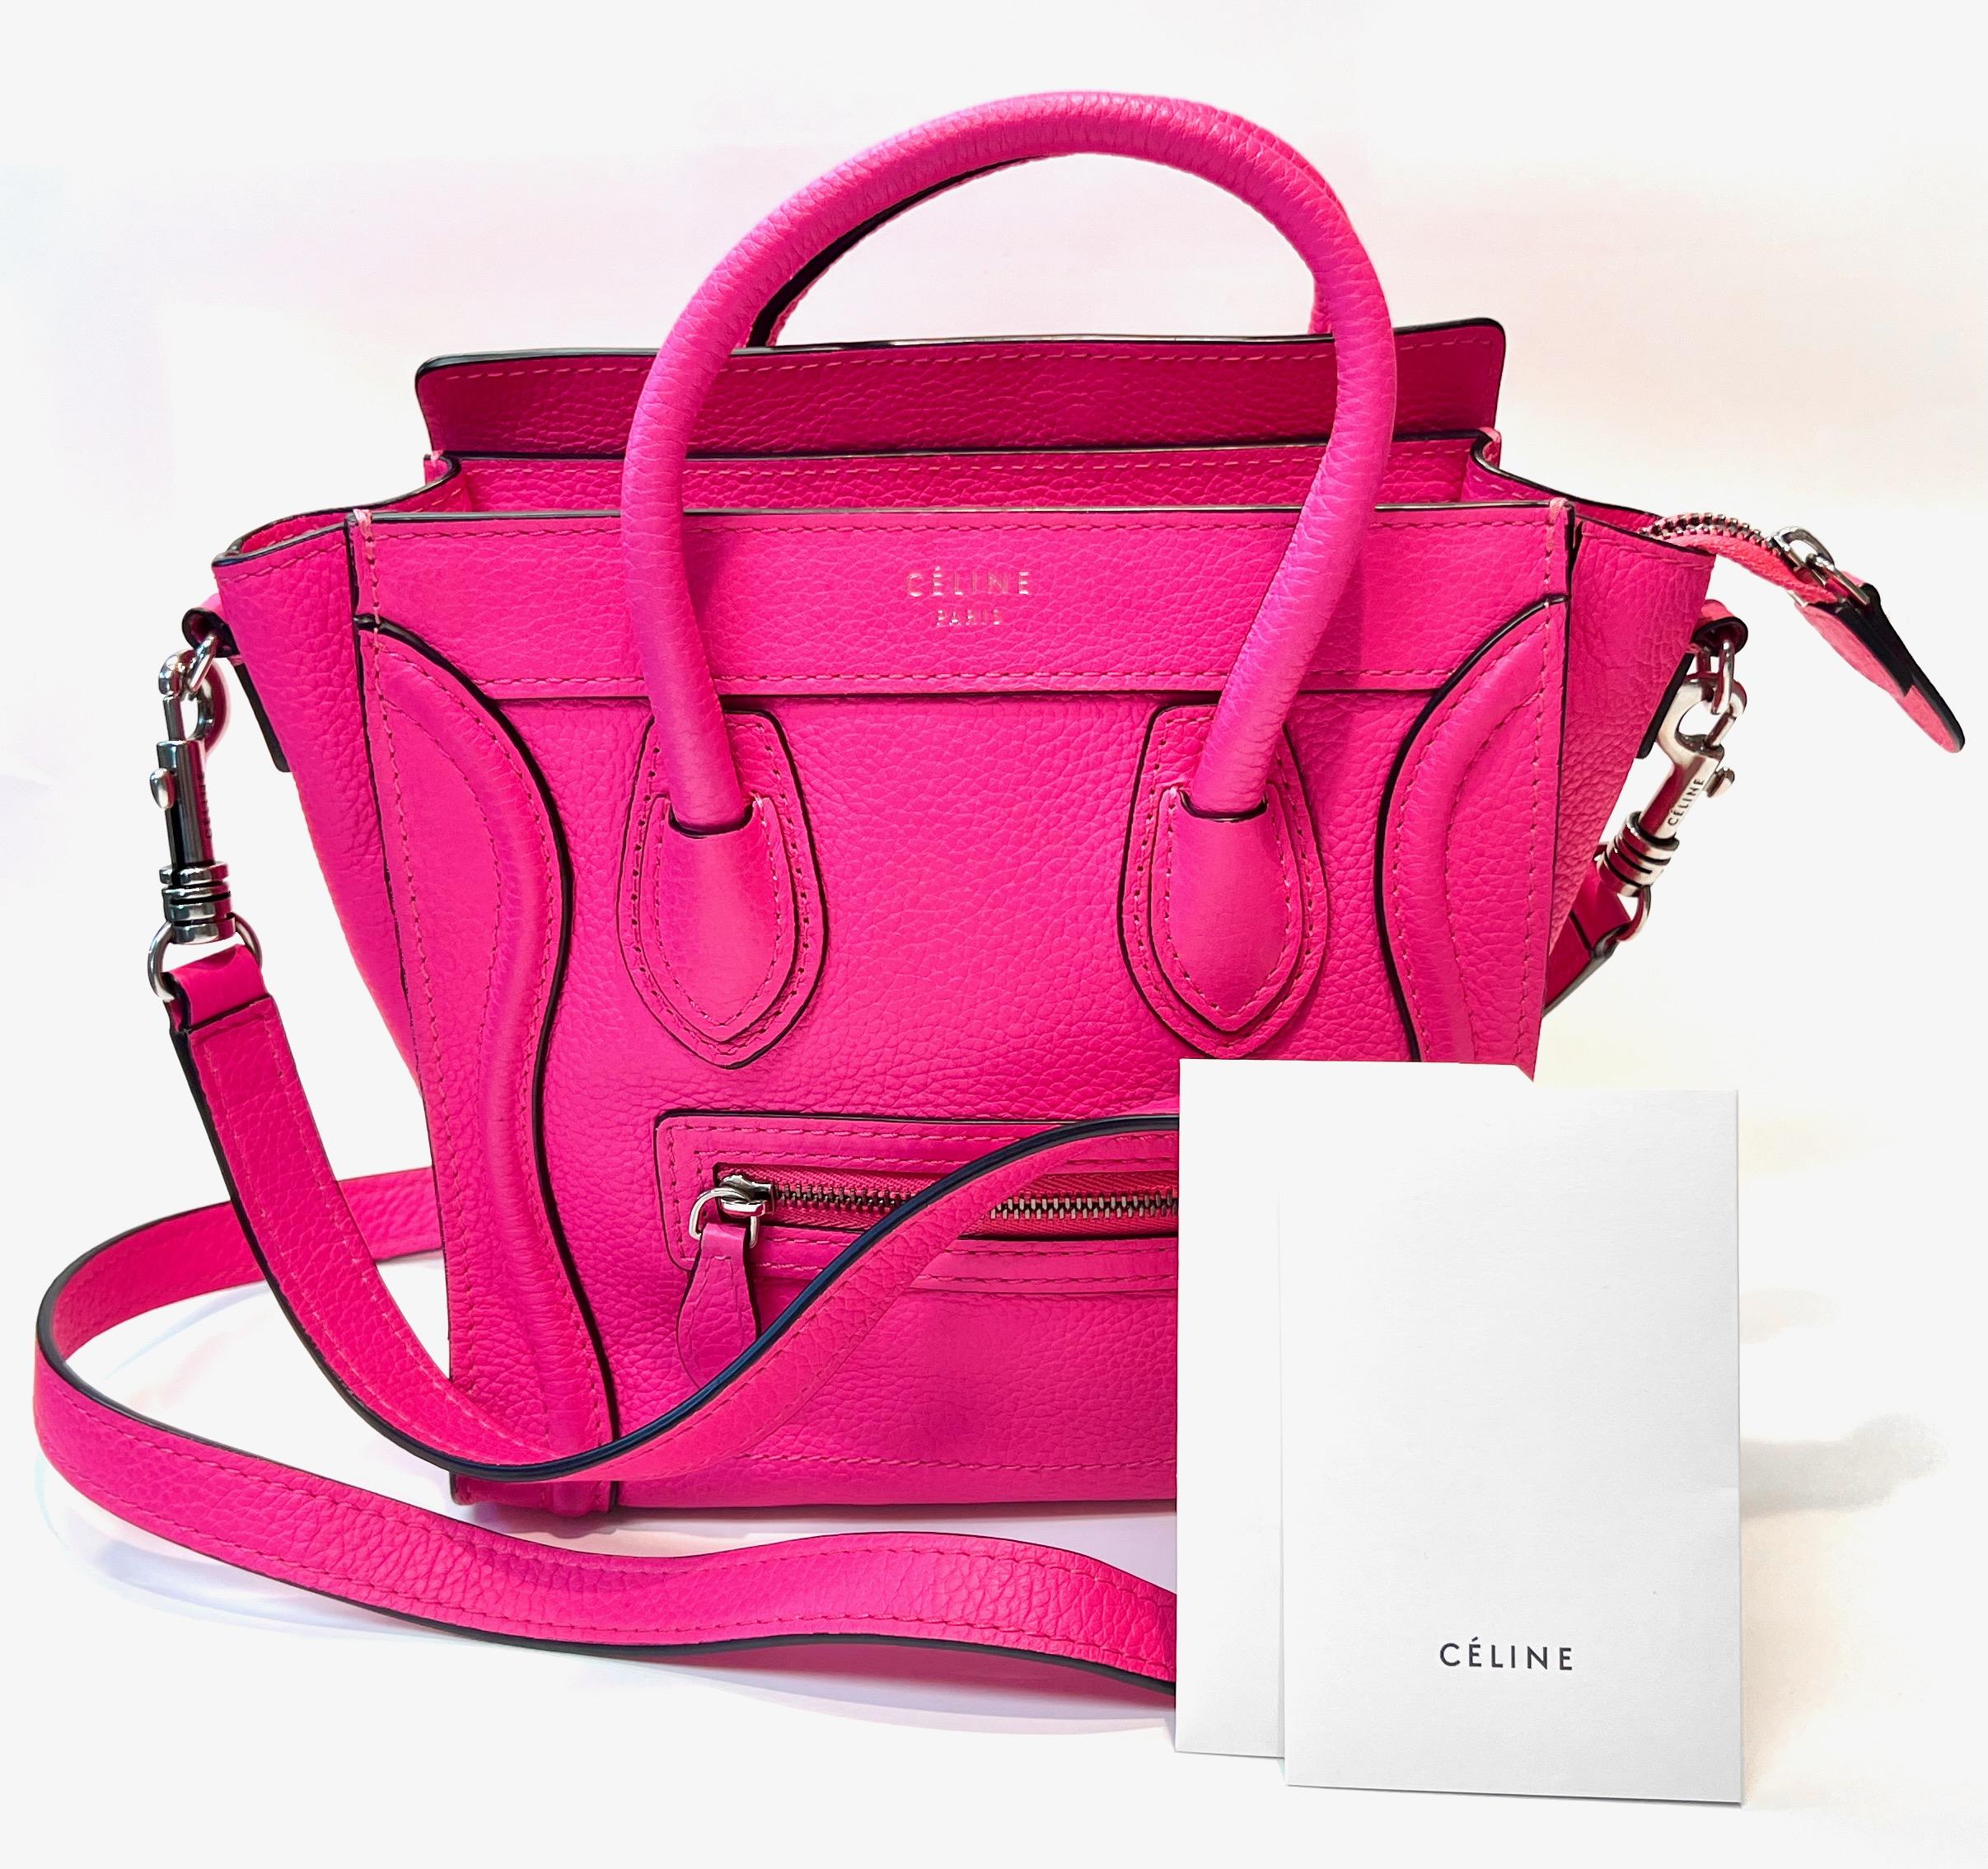 Original Celine
Hot Pink Leather Bag
Condition: Excellent
Height 10 Inches
Width 8 Inches
Dust Bag and Papers Included